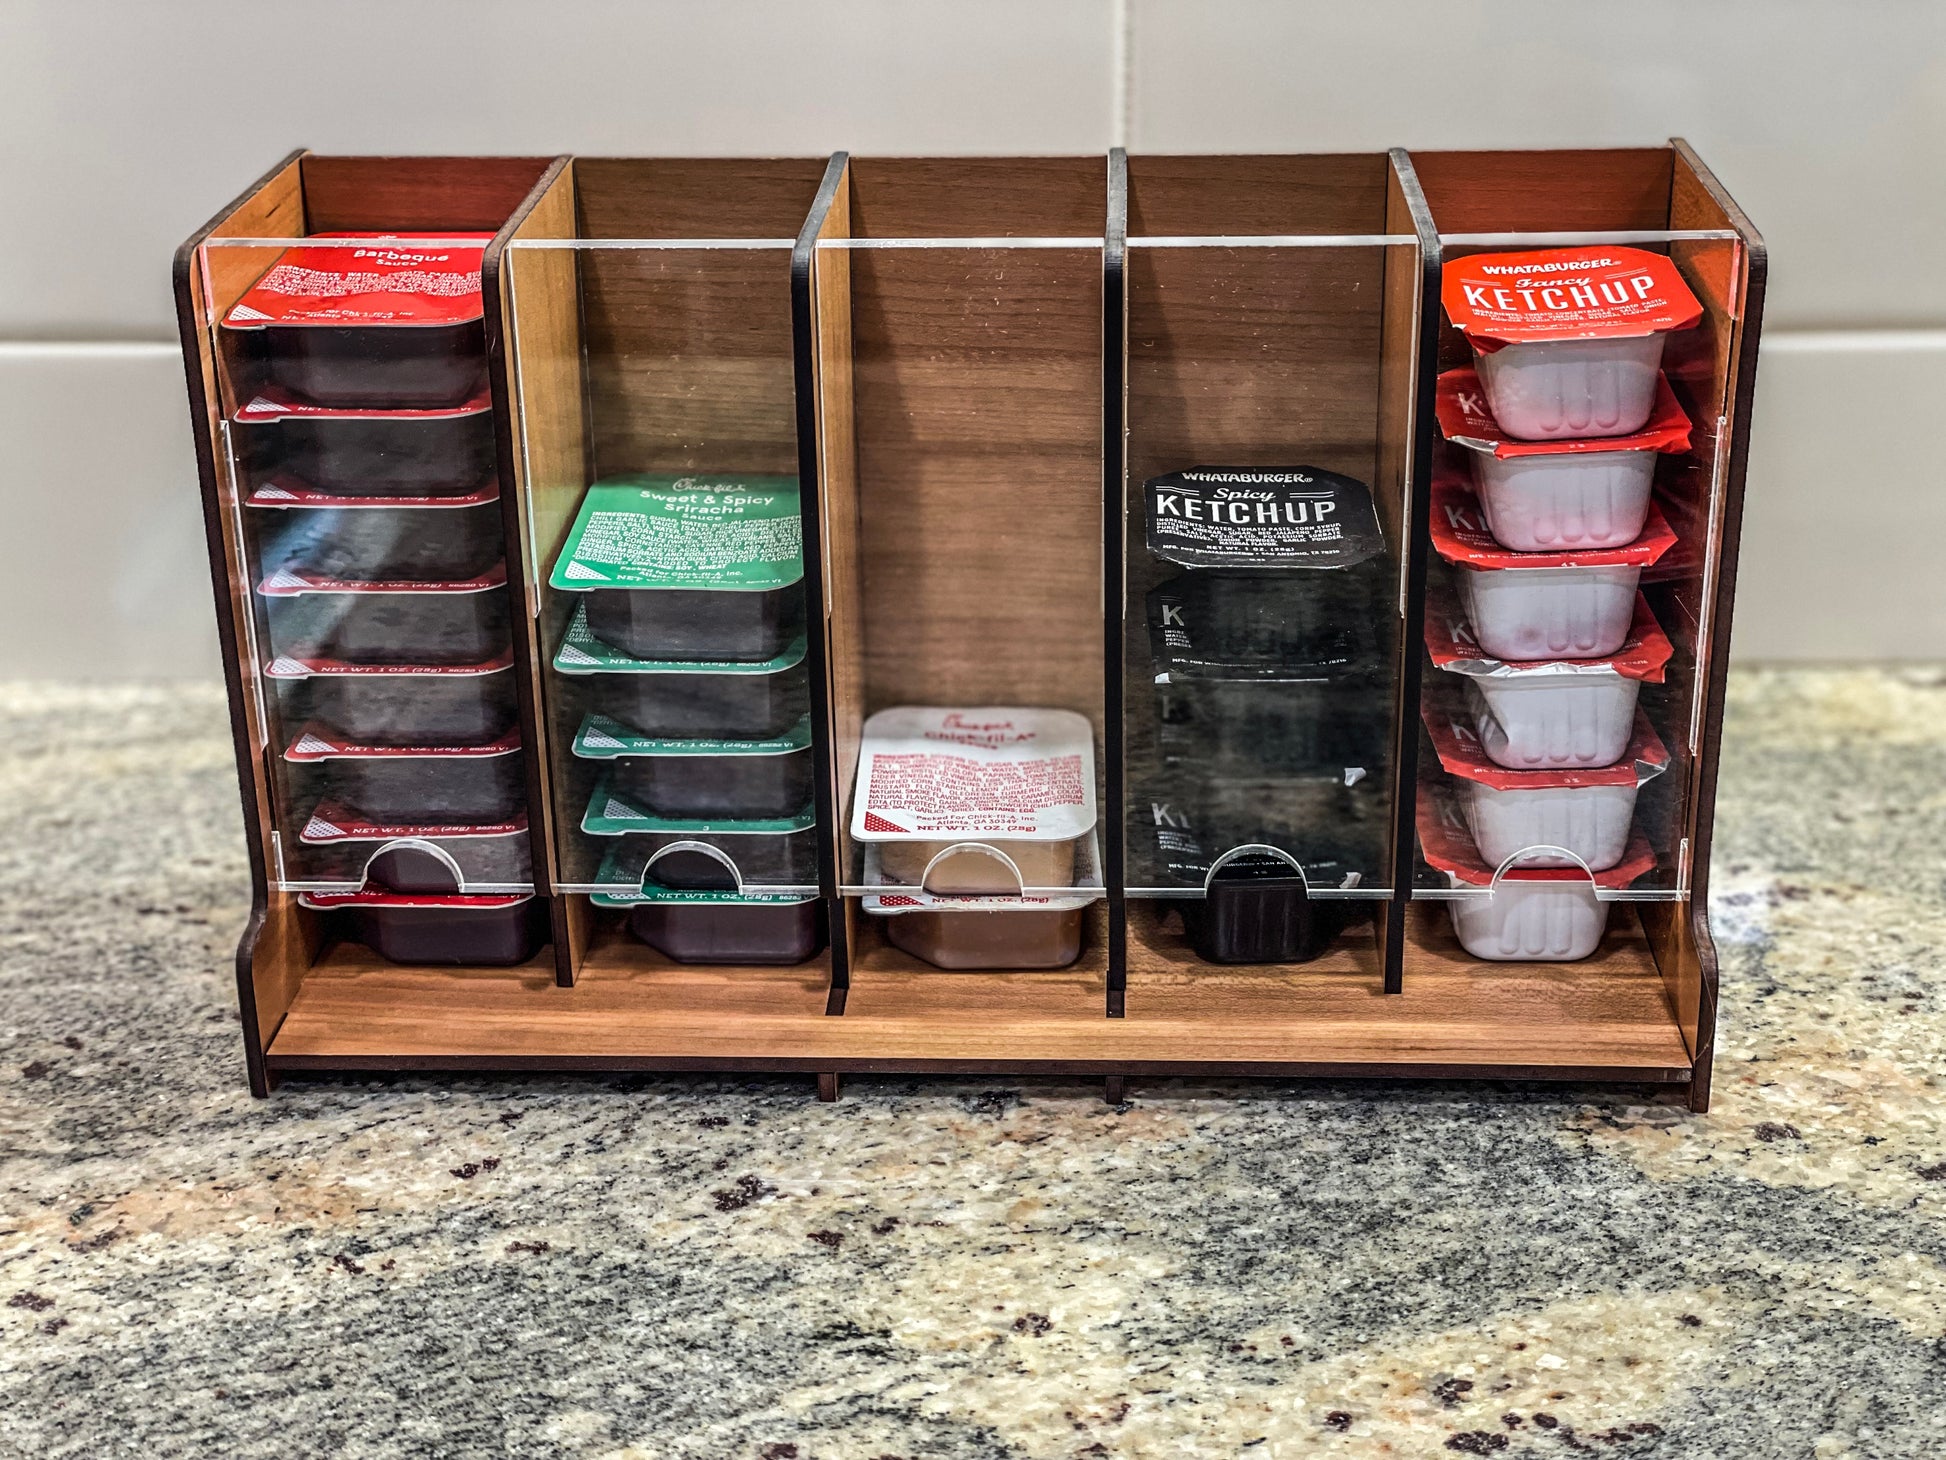 Shelves for Large Spice Containers - Made on a Glowforge - Glowforge Owners  Forum